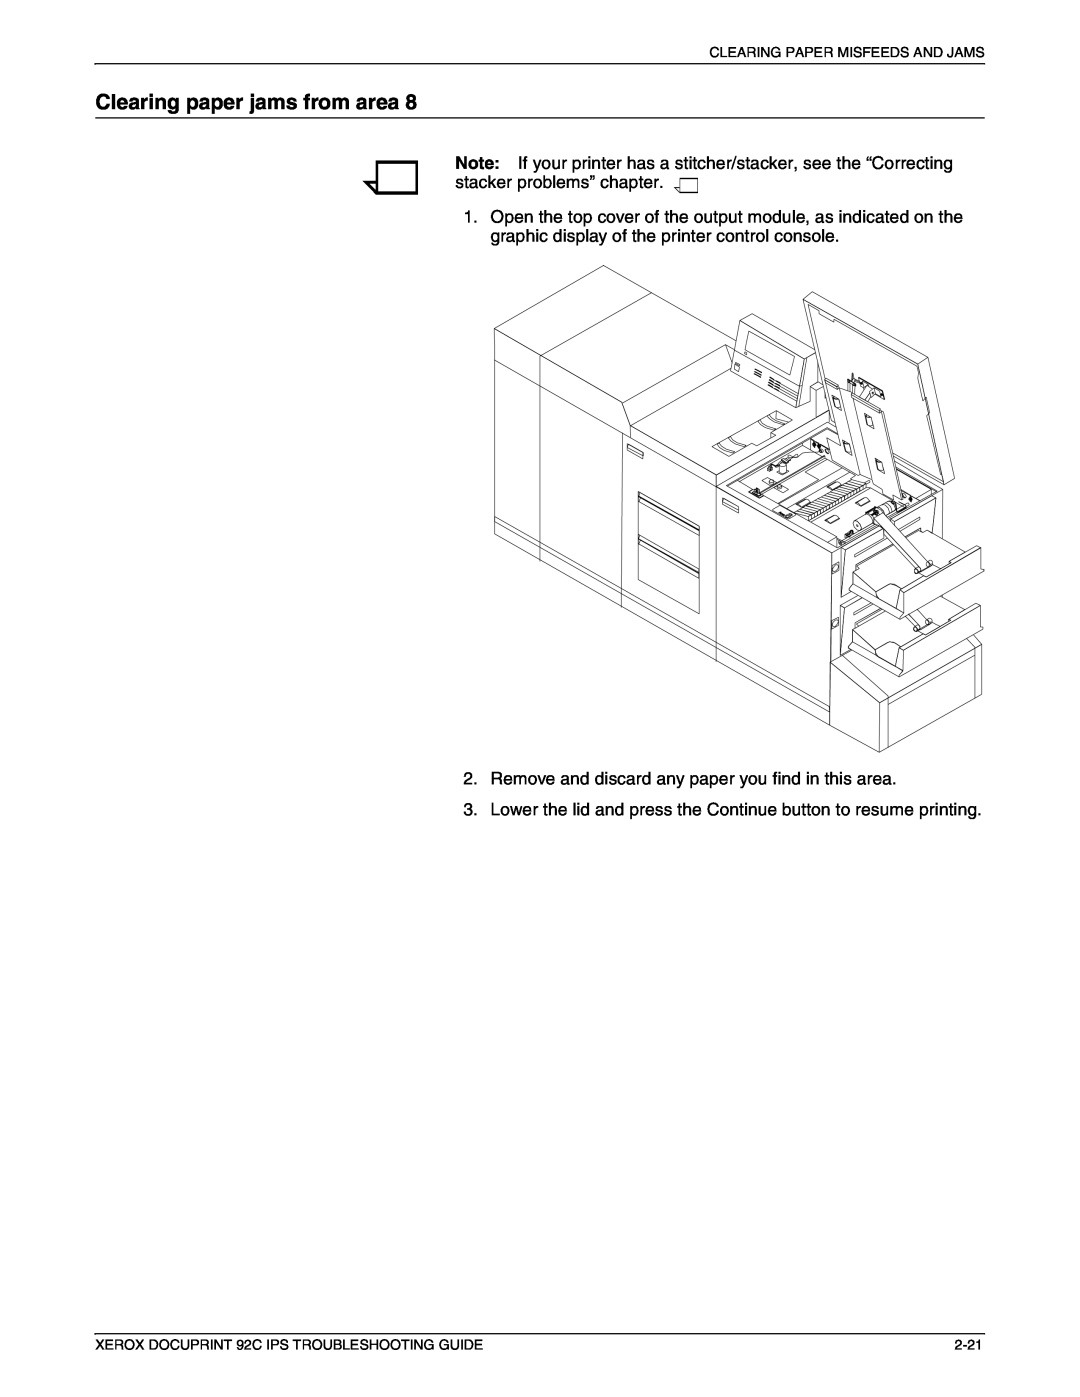 Xerox 92C IPS manual Clearing paper jams from area, Remove and discard any paper you find in this area 